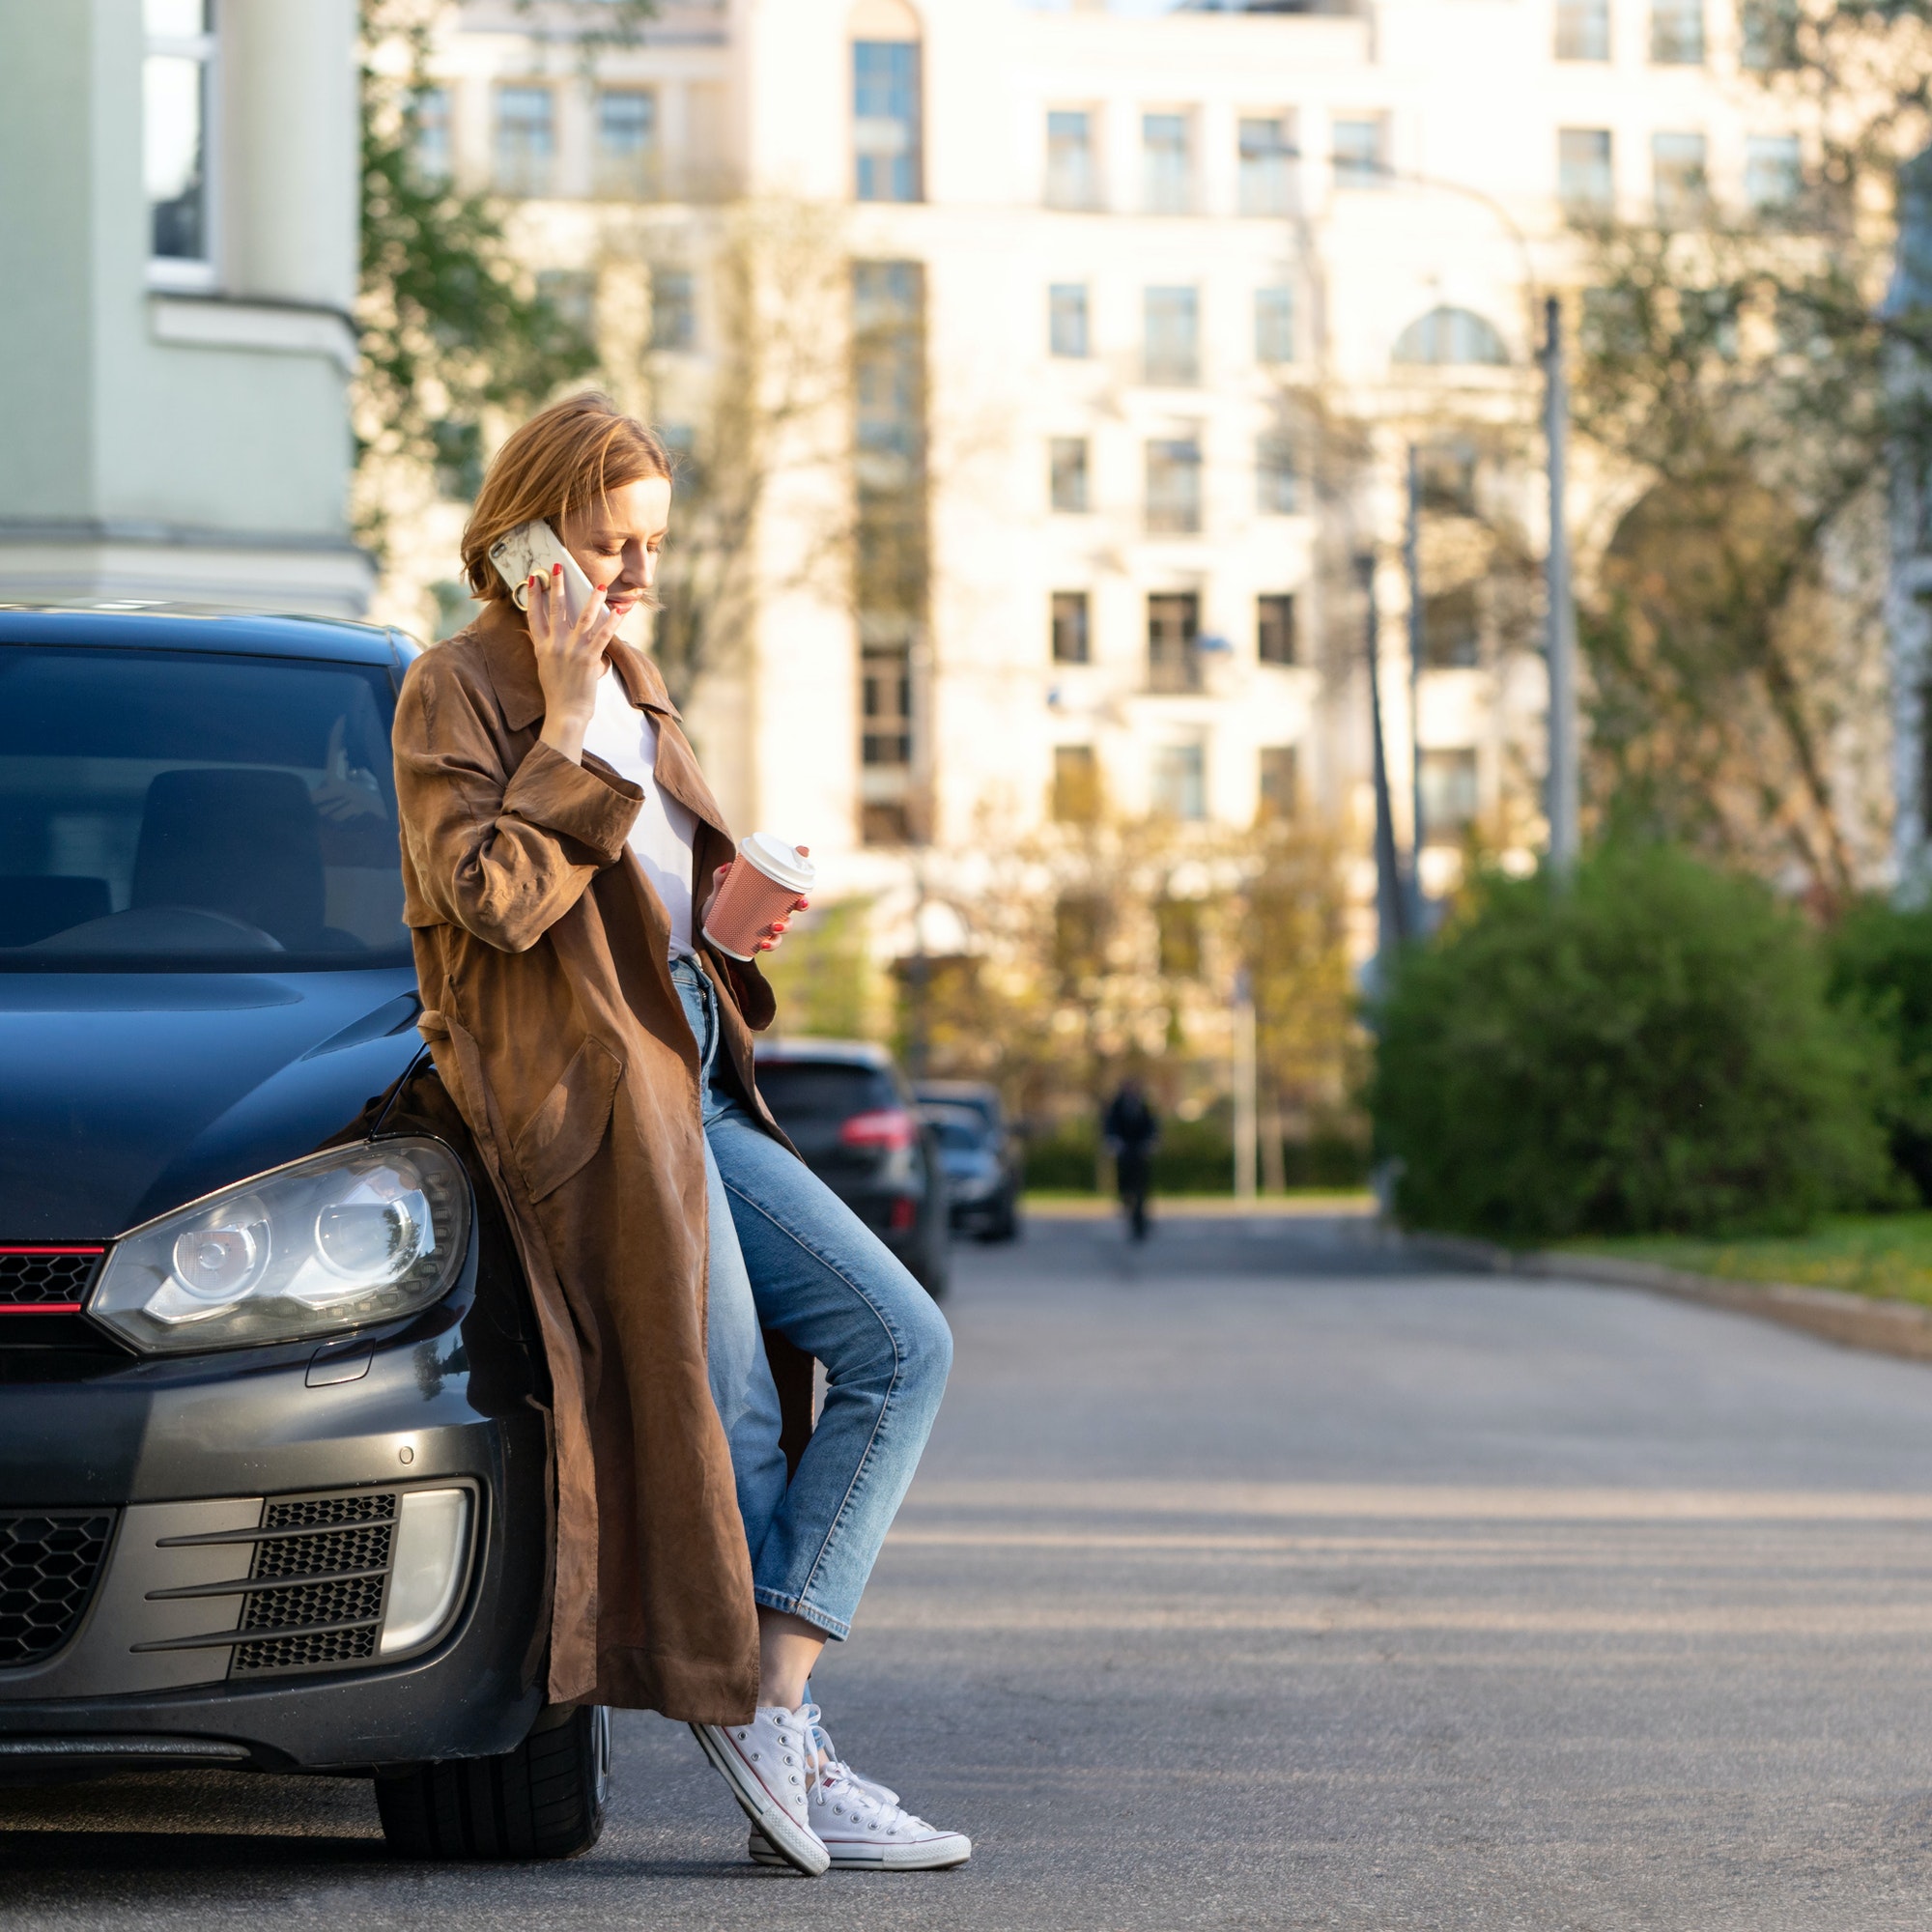 woman standing near her car and talking on the phone, holding a coffee cup